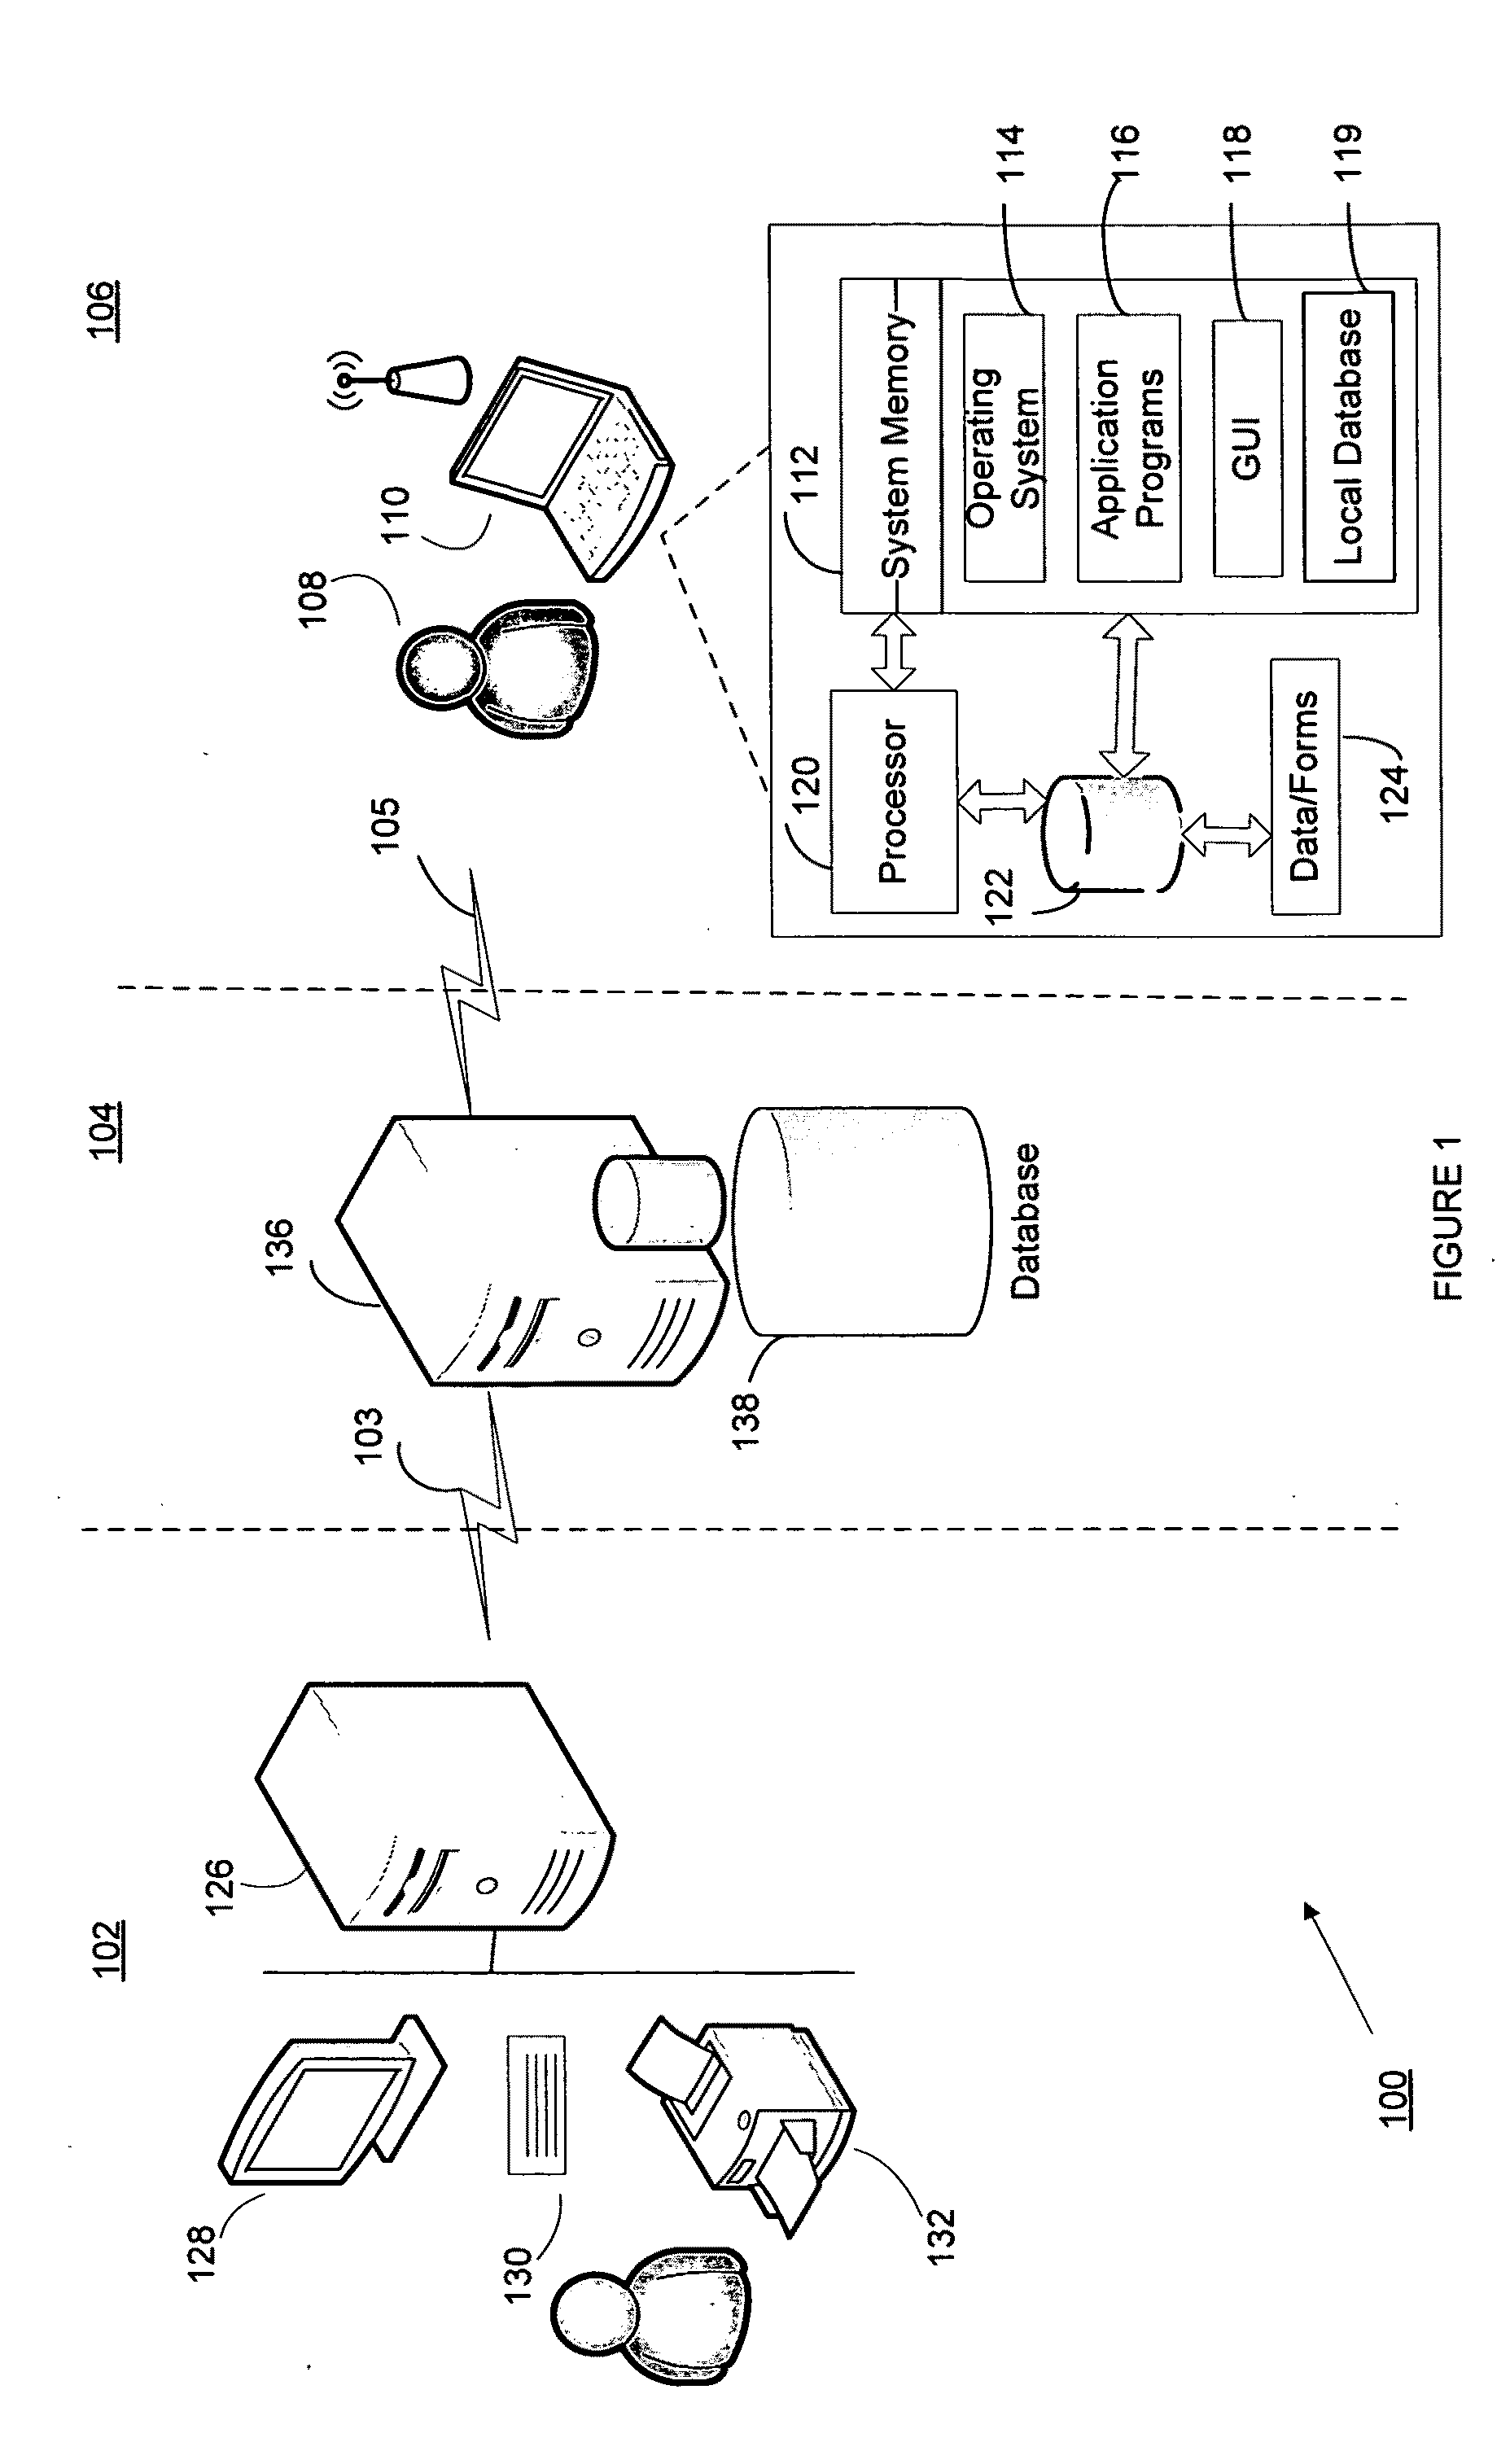 Method and system for workflow integration